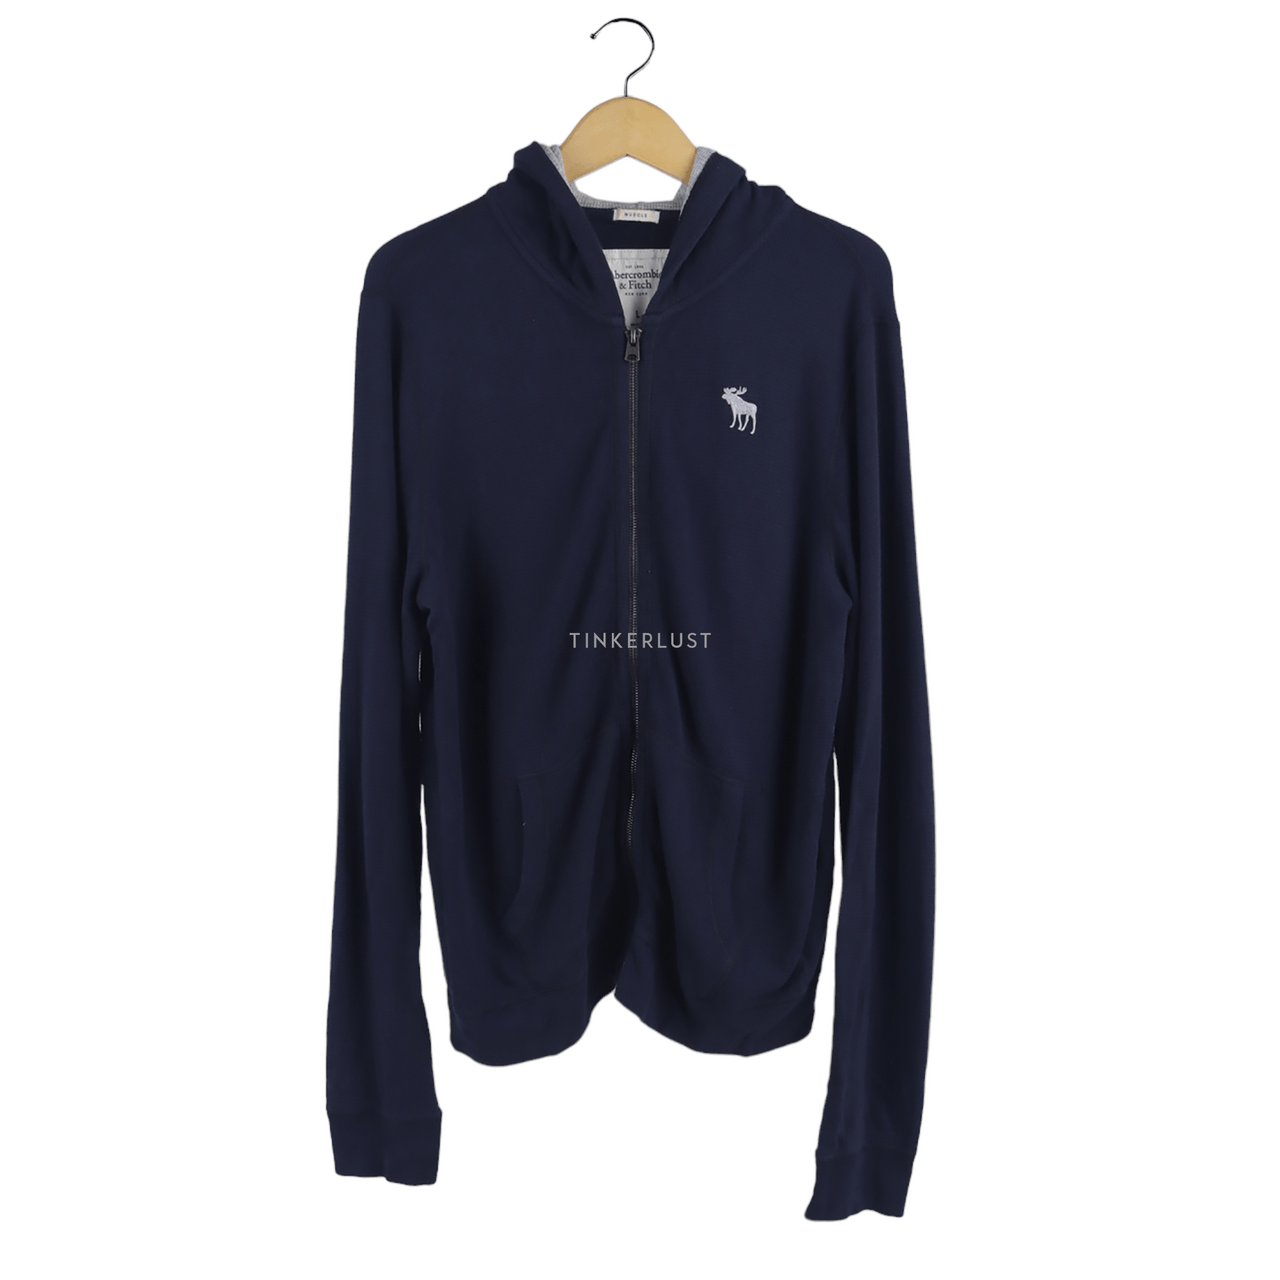 Abercrombie & Fitch Navy Jacket